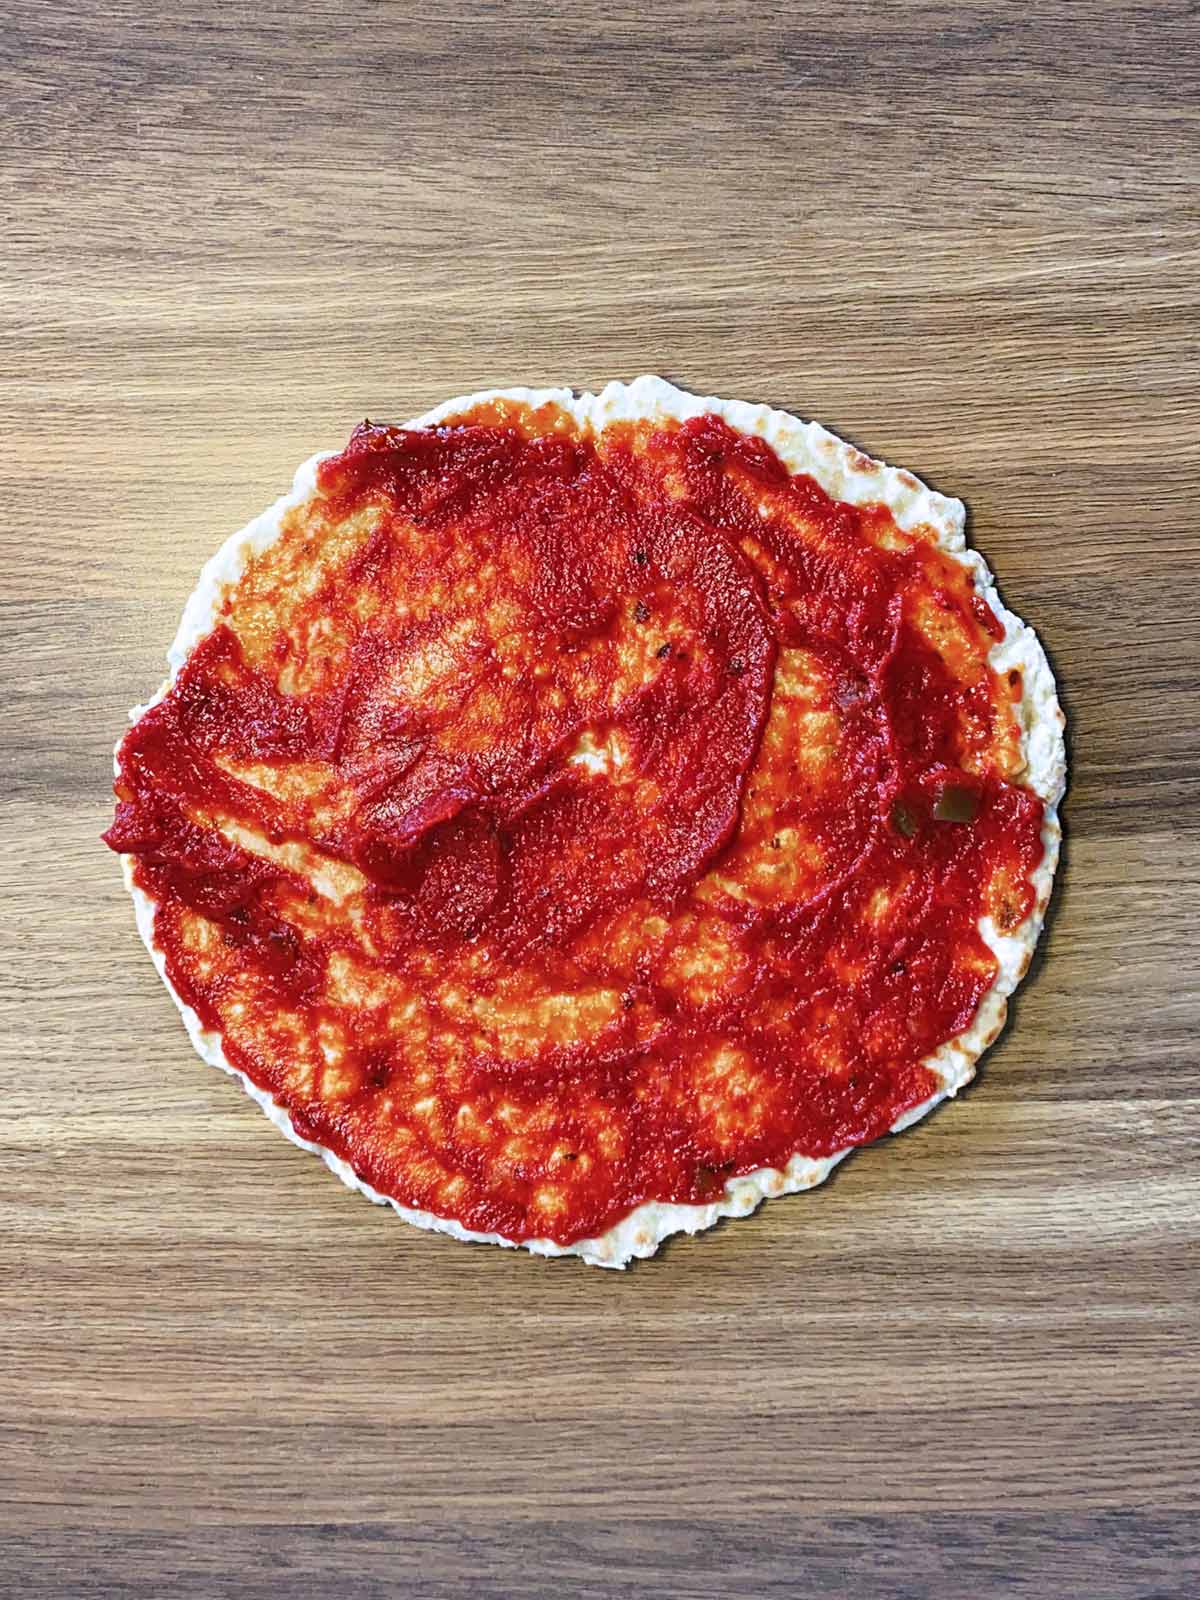 Pizza sauce spread over the cooked flatbread.